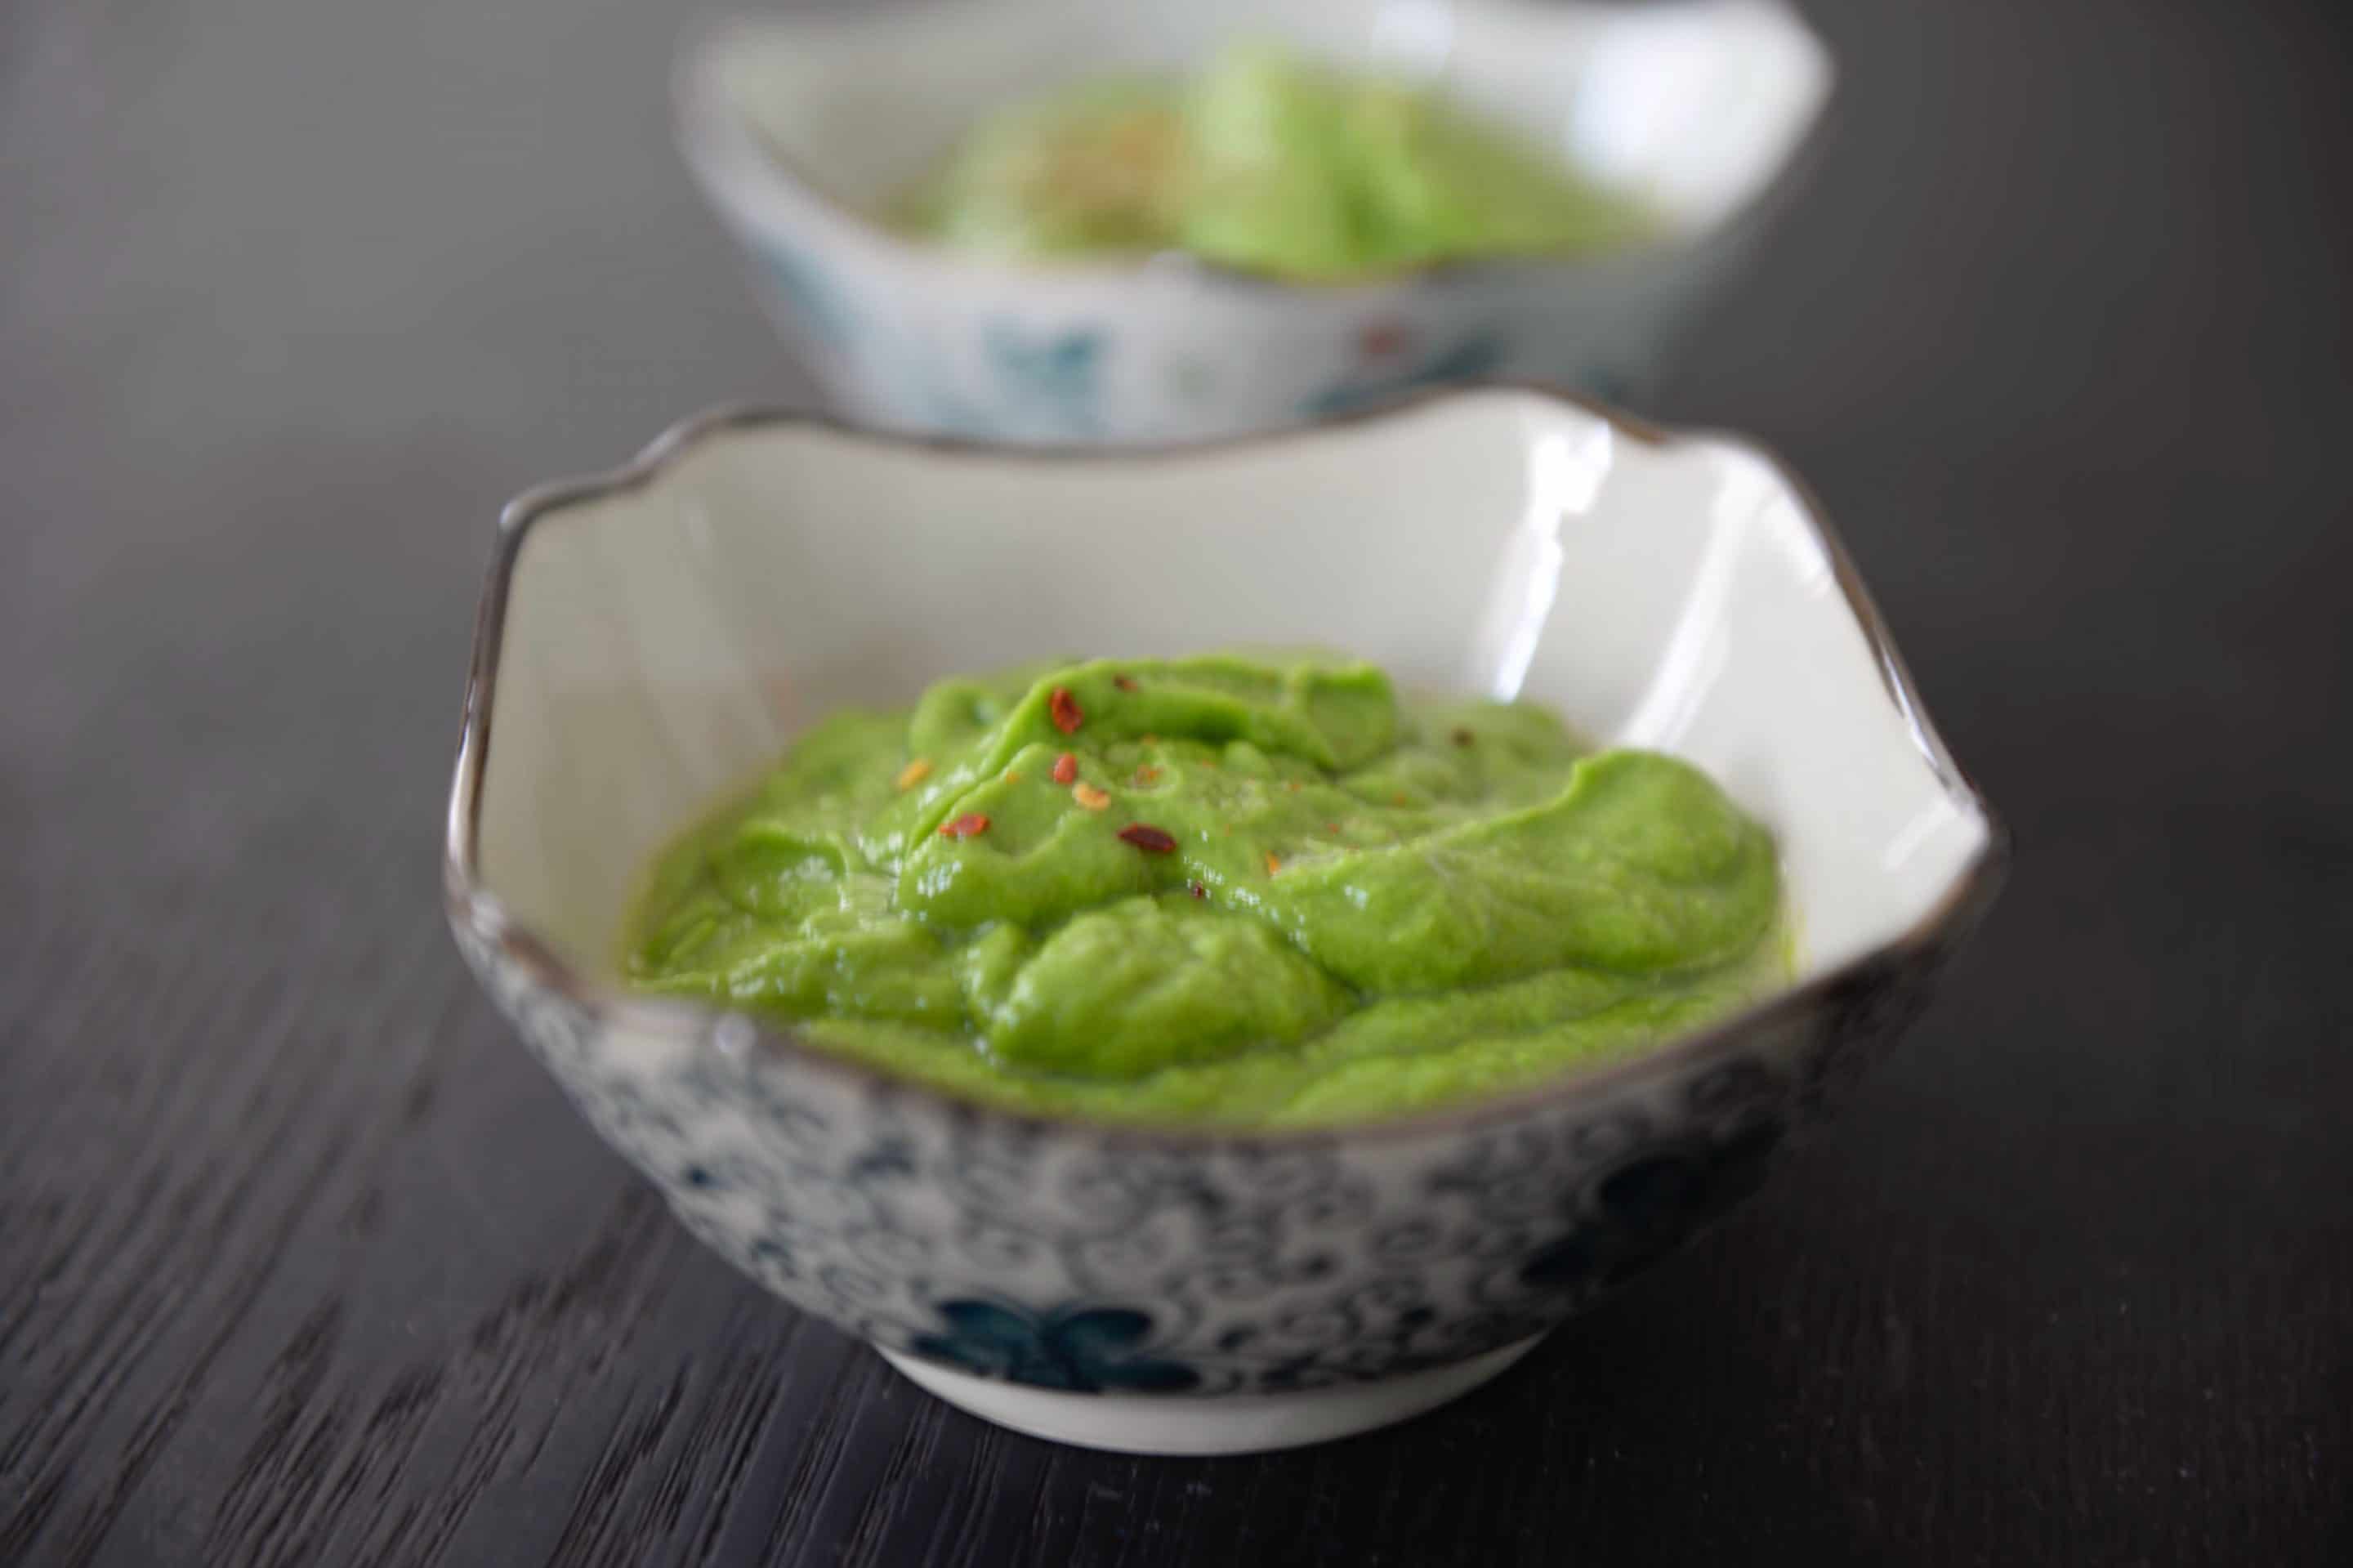 Avocado and baby spinach velouté